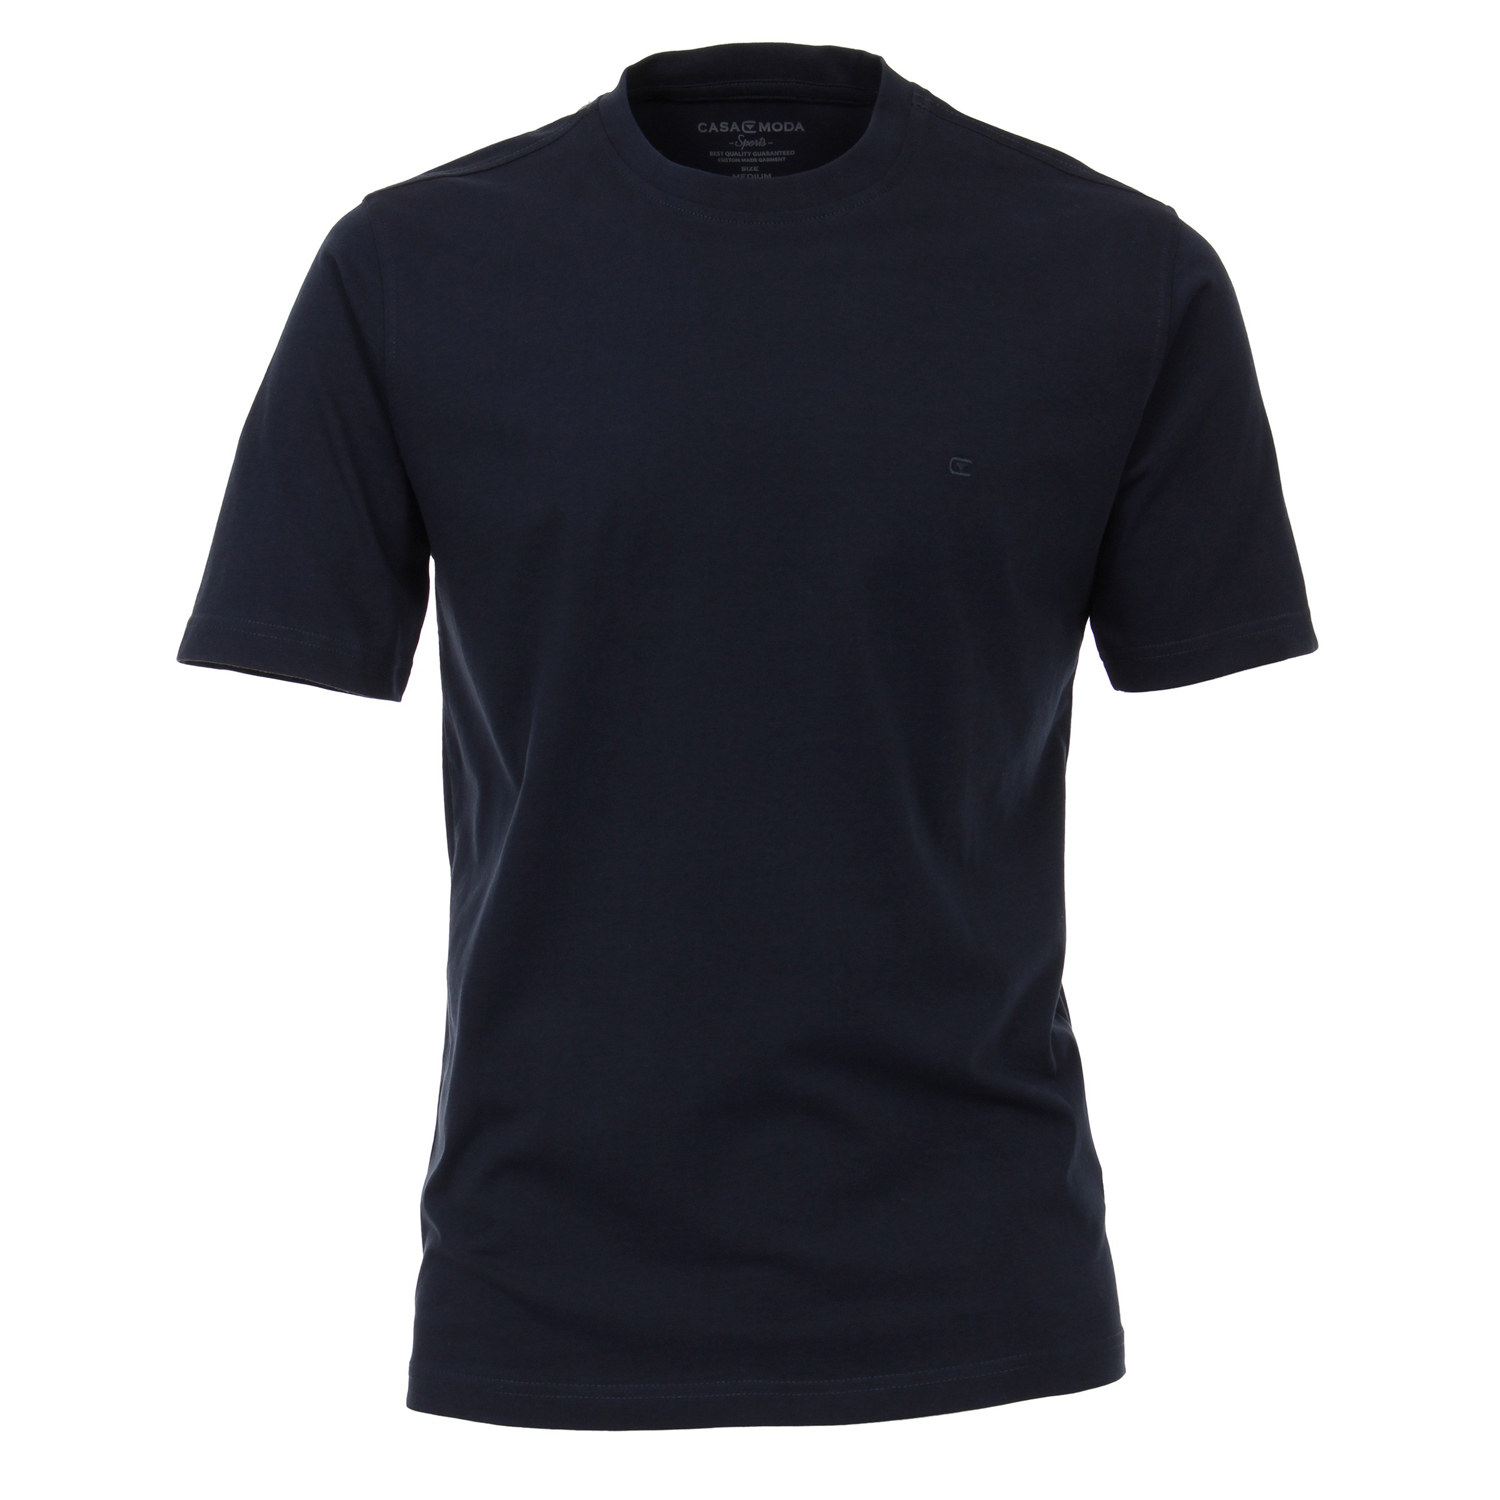 Basic T-shirt for men in dark blue by Casamoda in plus size up to 6XL 